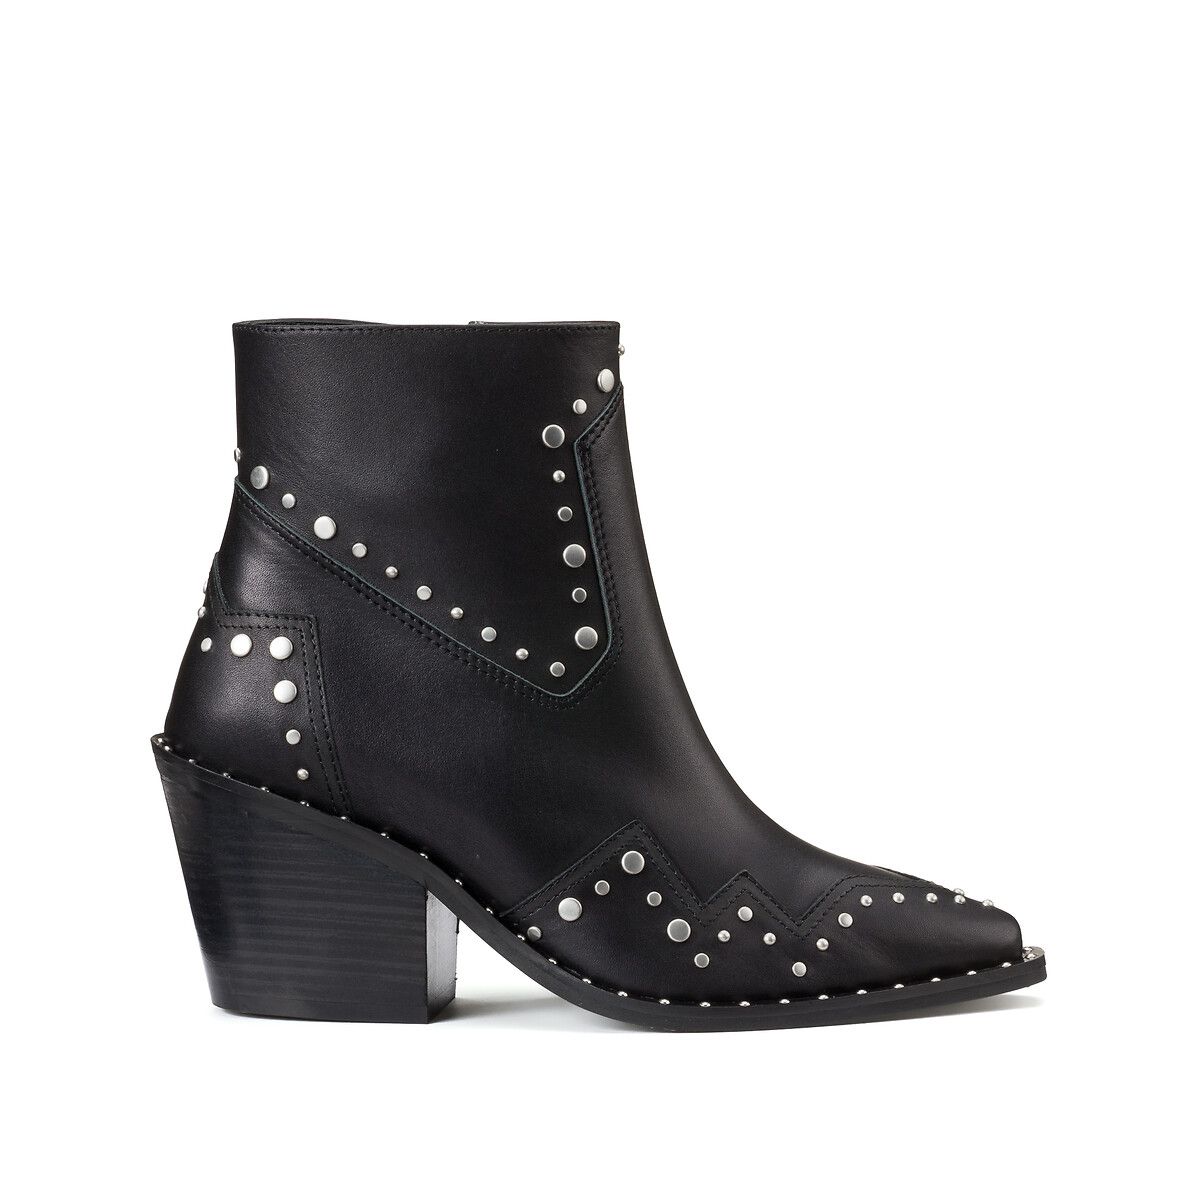 Leather Studded Ankle Boots with Pointed Toe | La Redoute (UK)